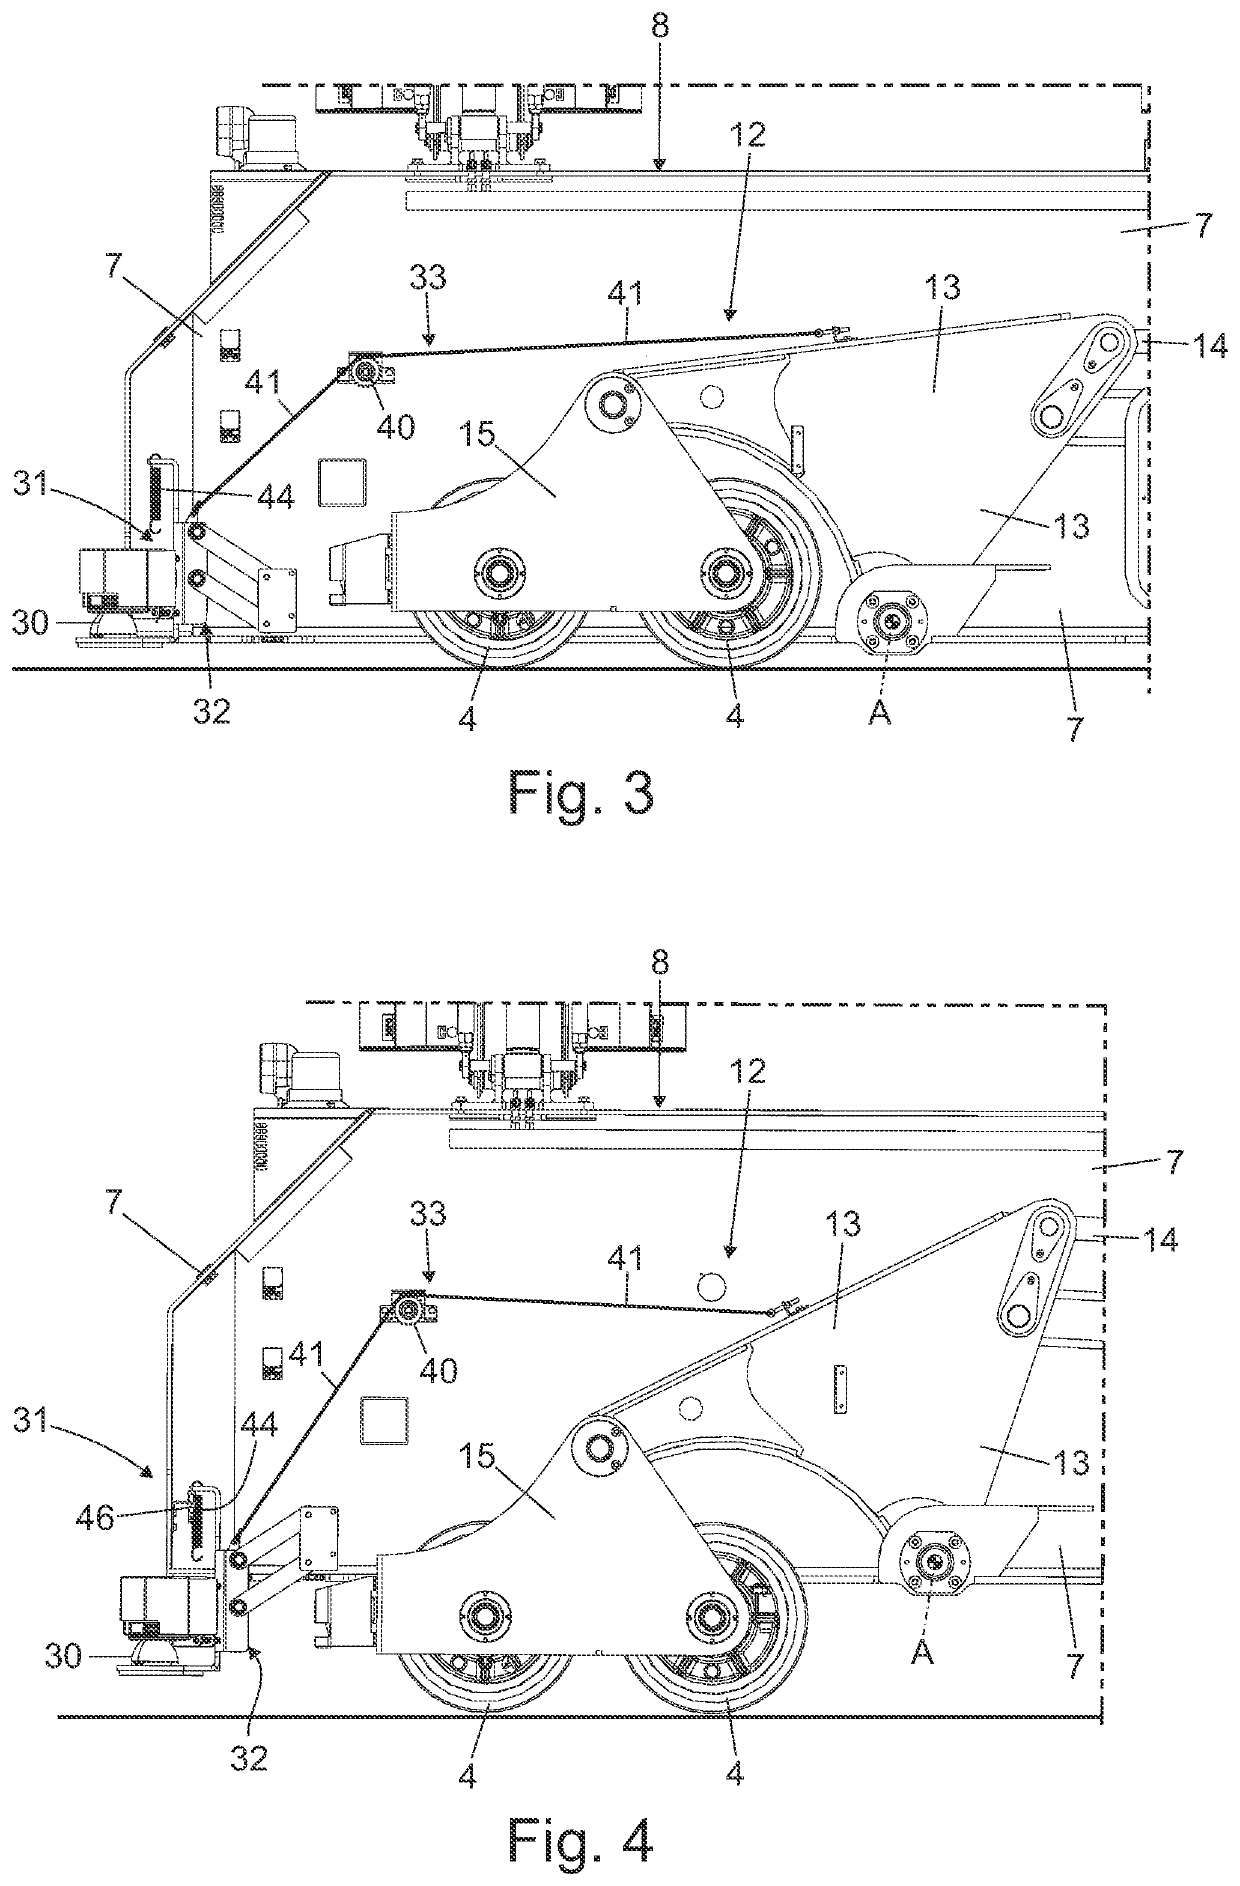 Self-propelled vehicle for handling glass-sheet supporting racks